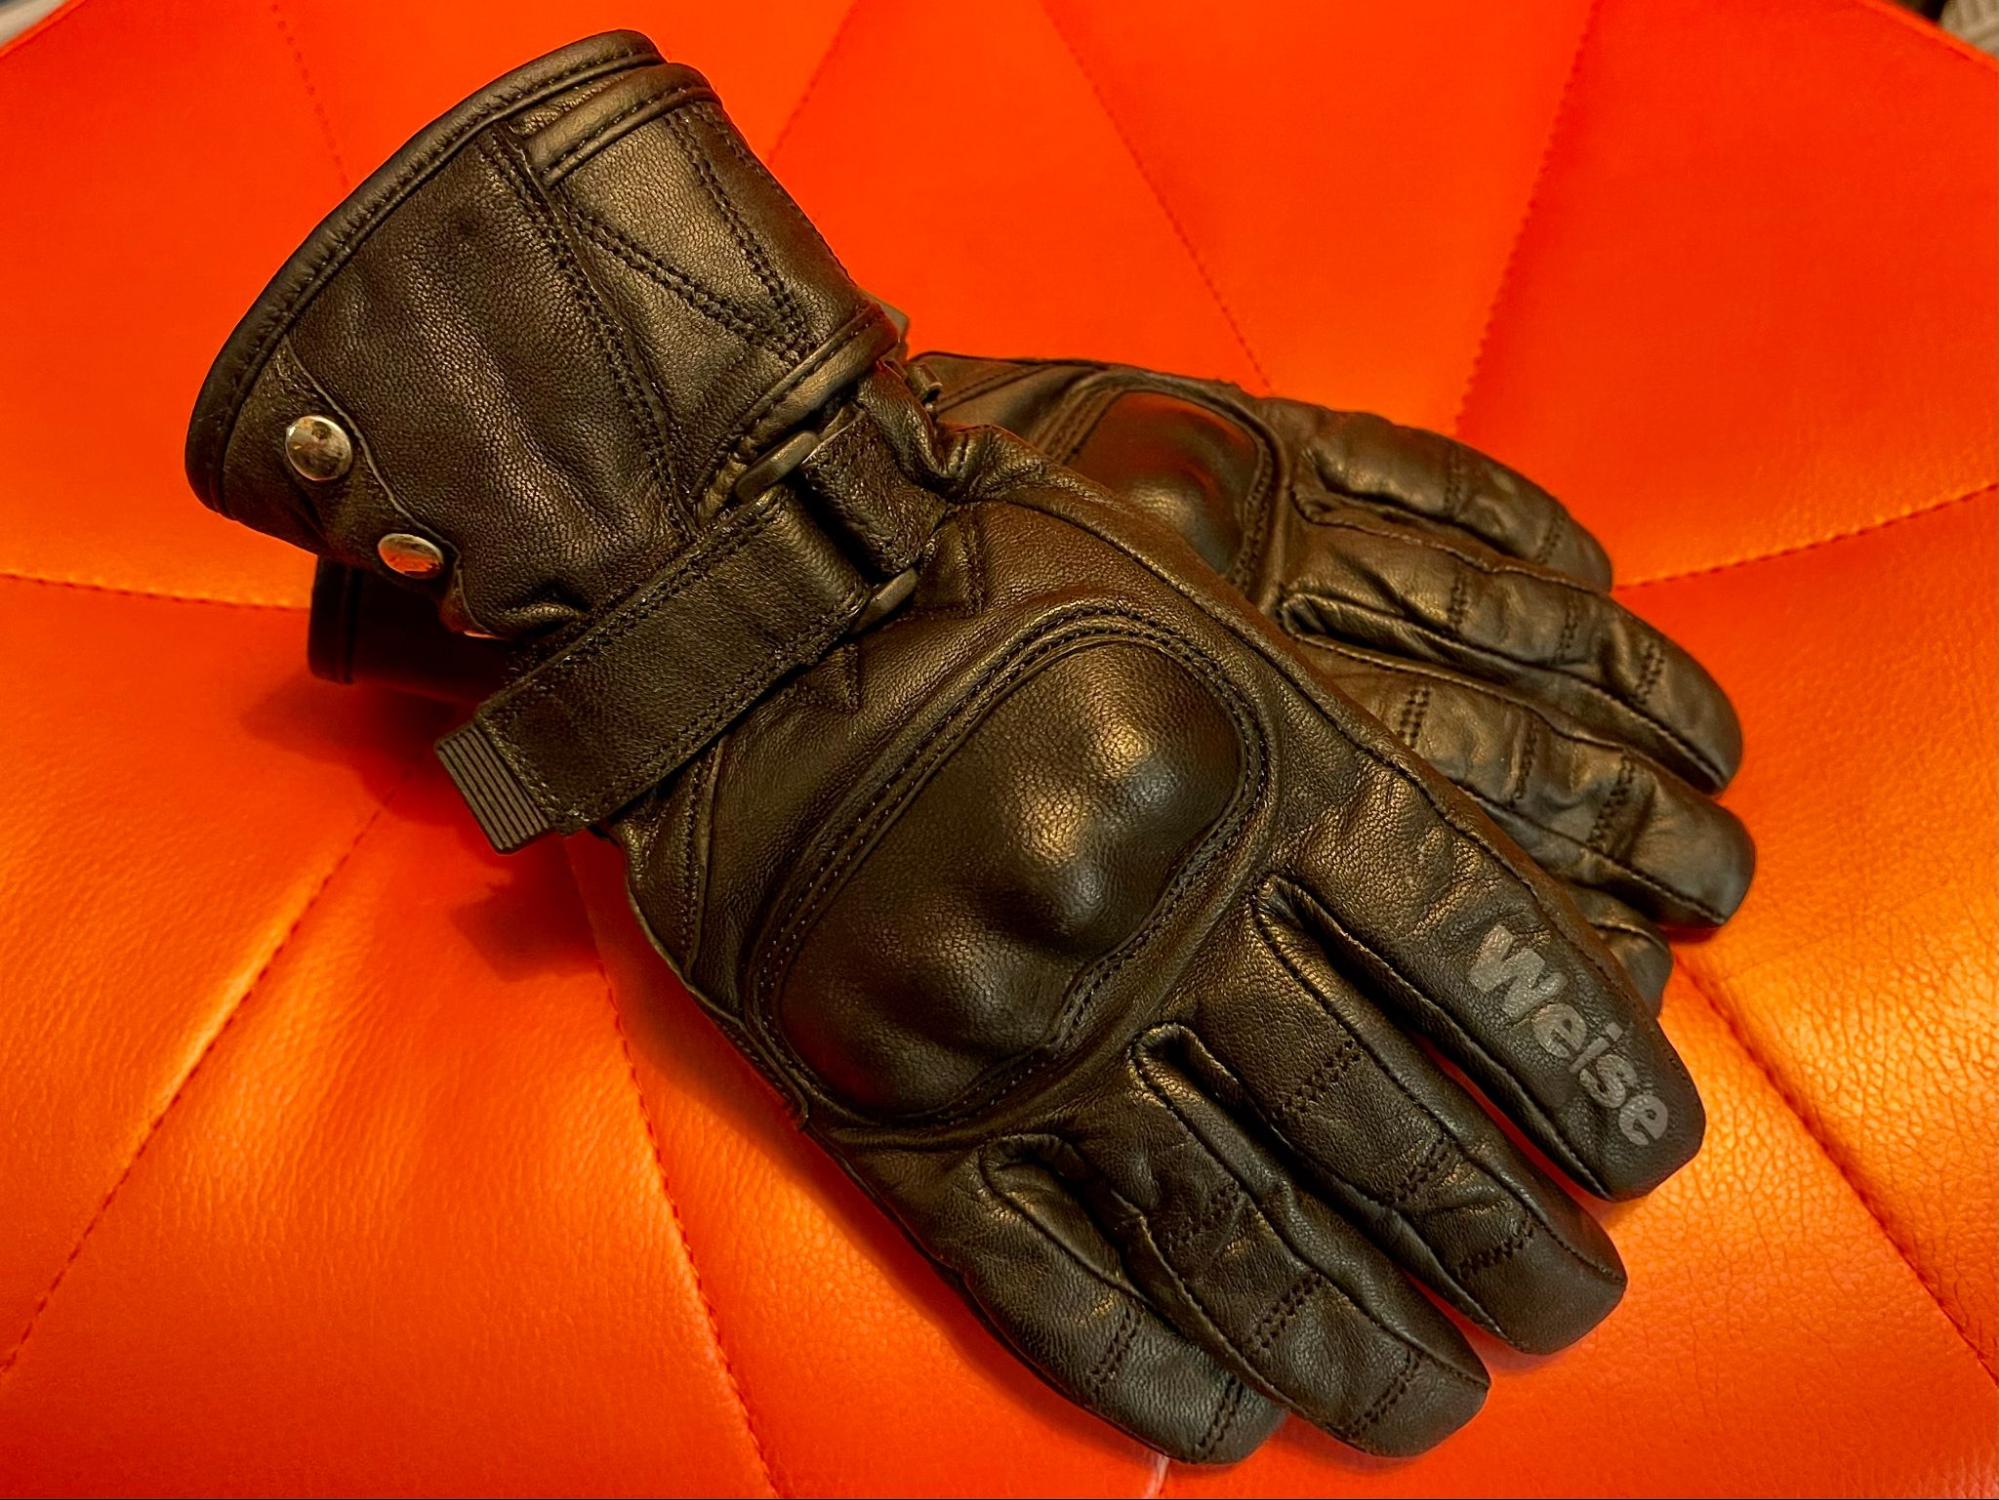 Top view of the Weise Ripley WP Ladies Gloves